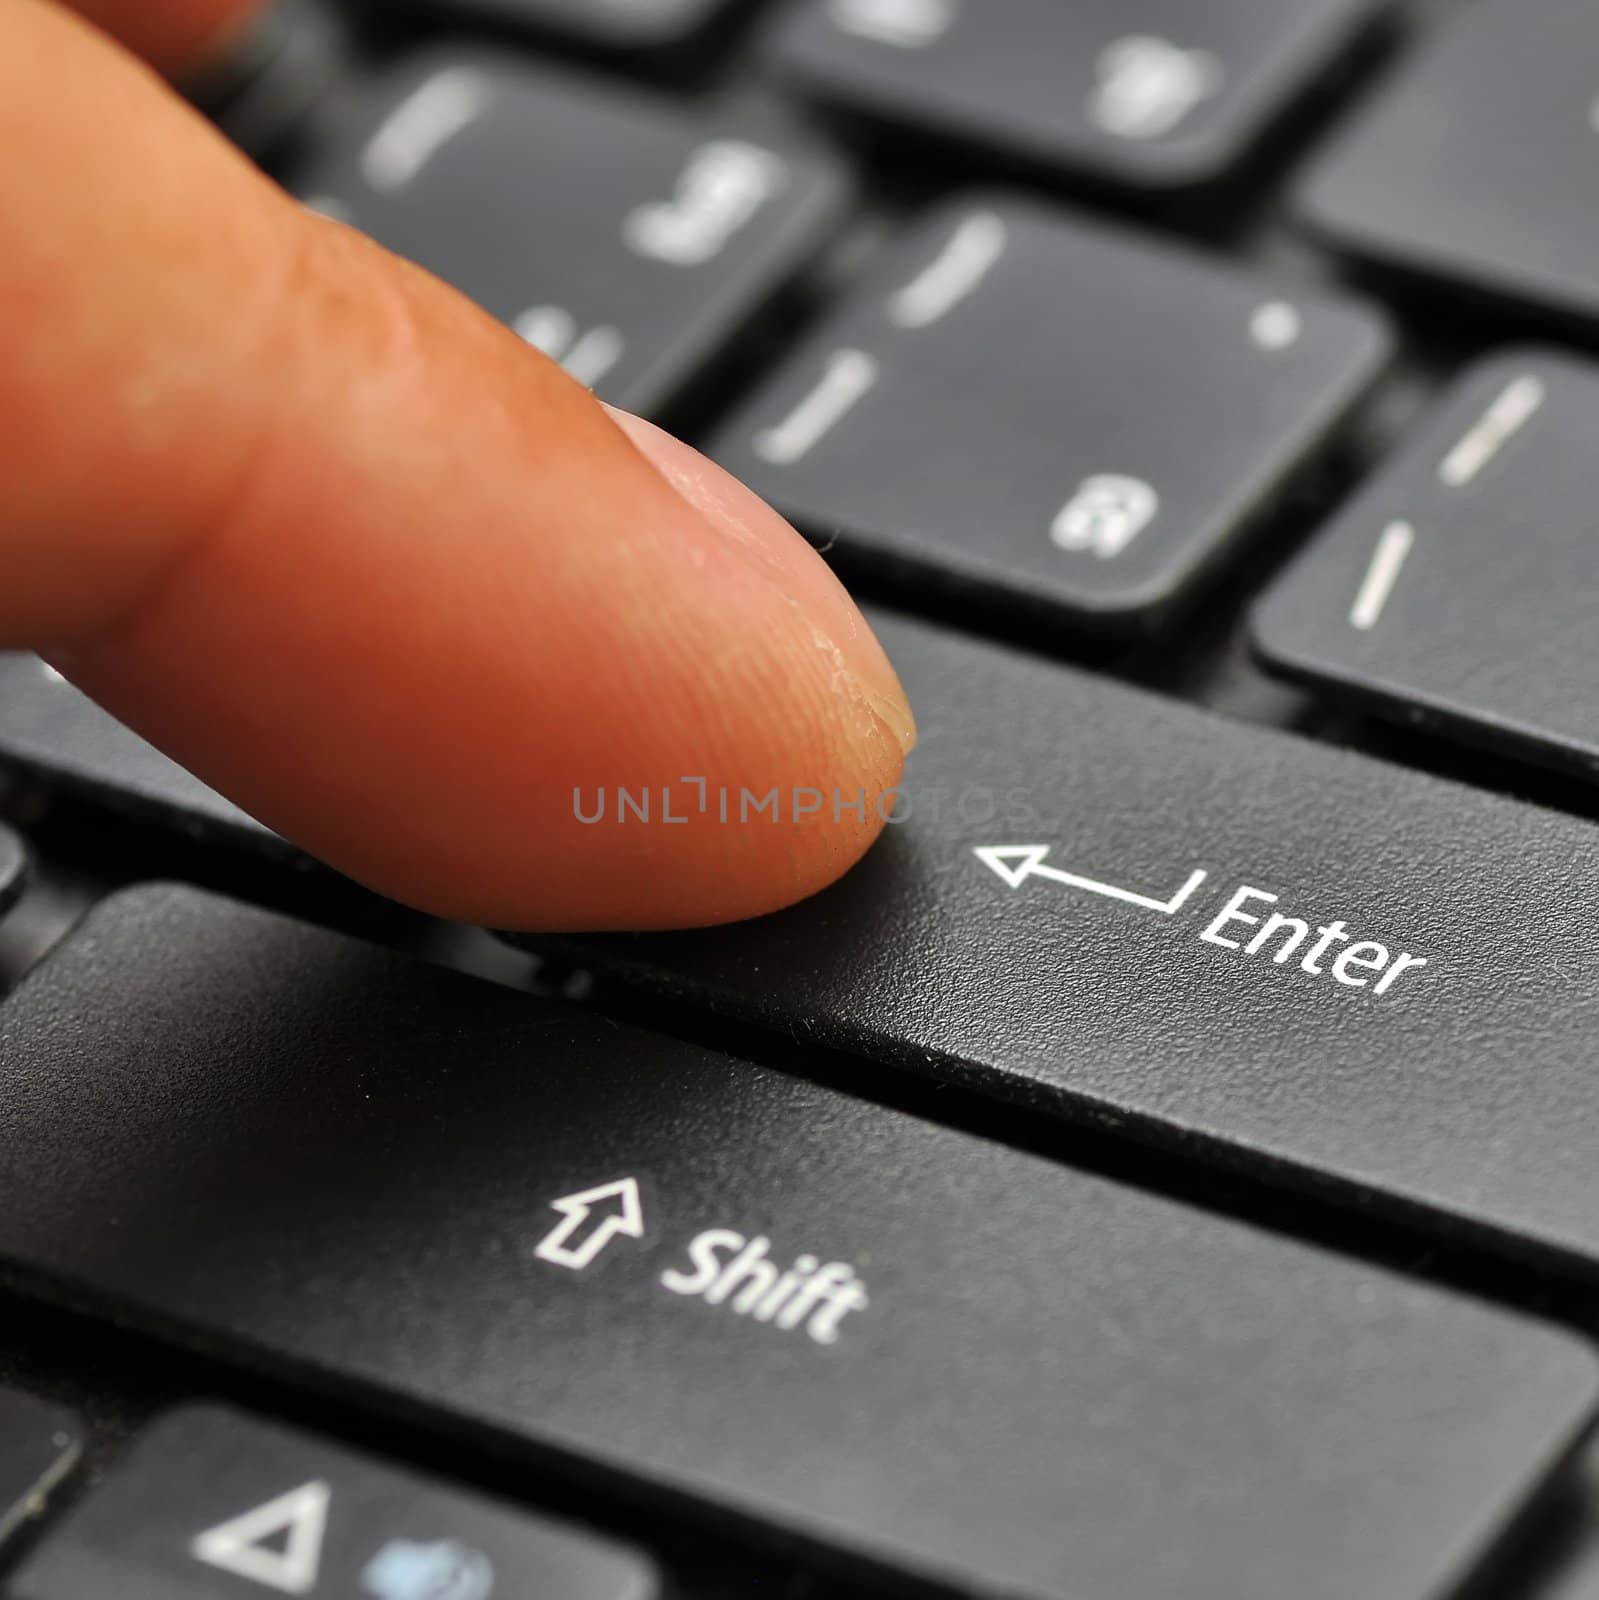 Finger on computer keyboard by phanlop88